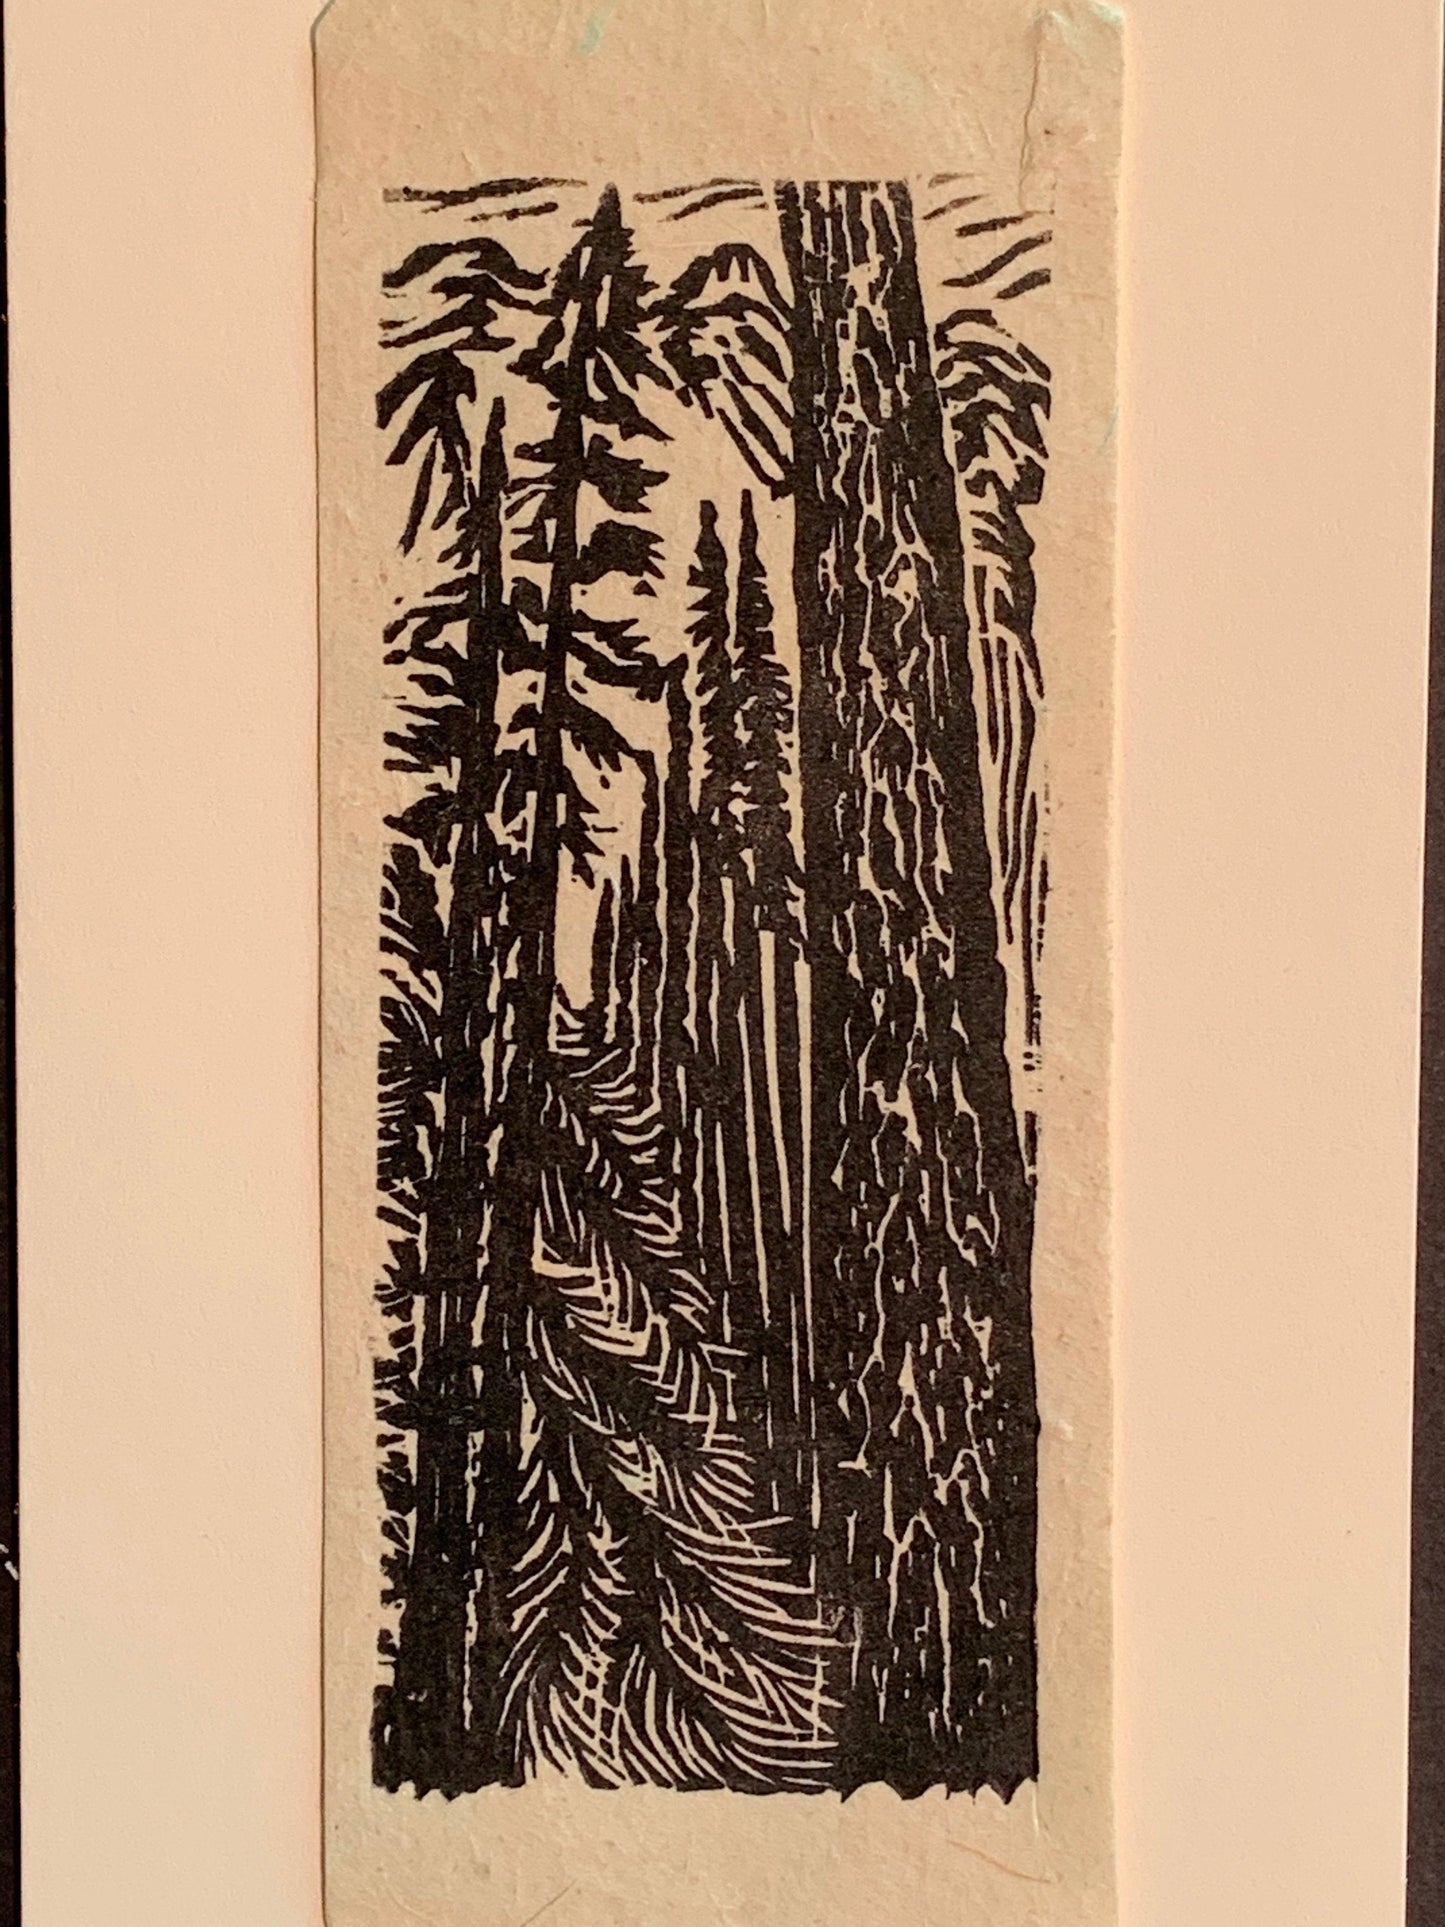 White Pine Tree Small Original Woodcut from Alpine Mountain Trees Landscape Collection